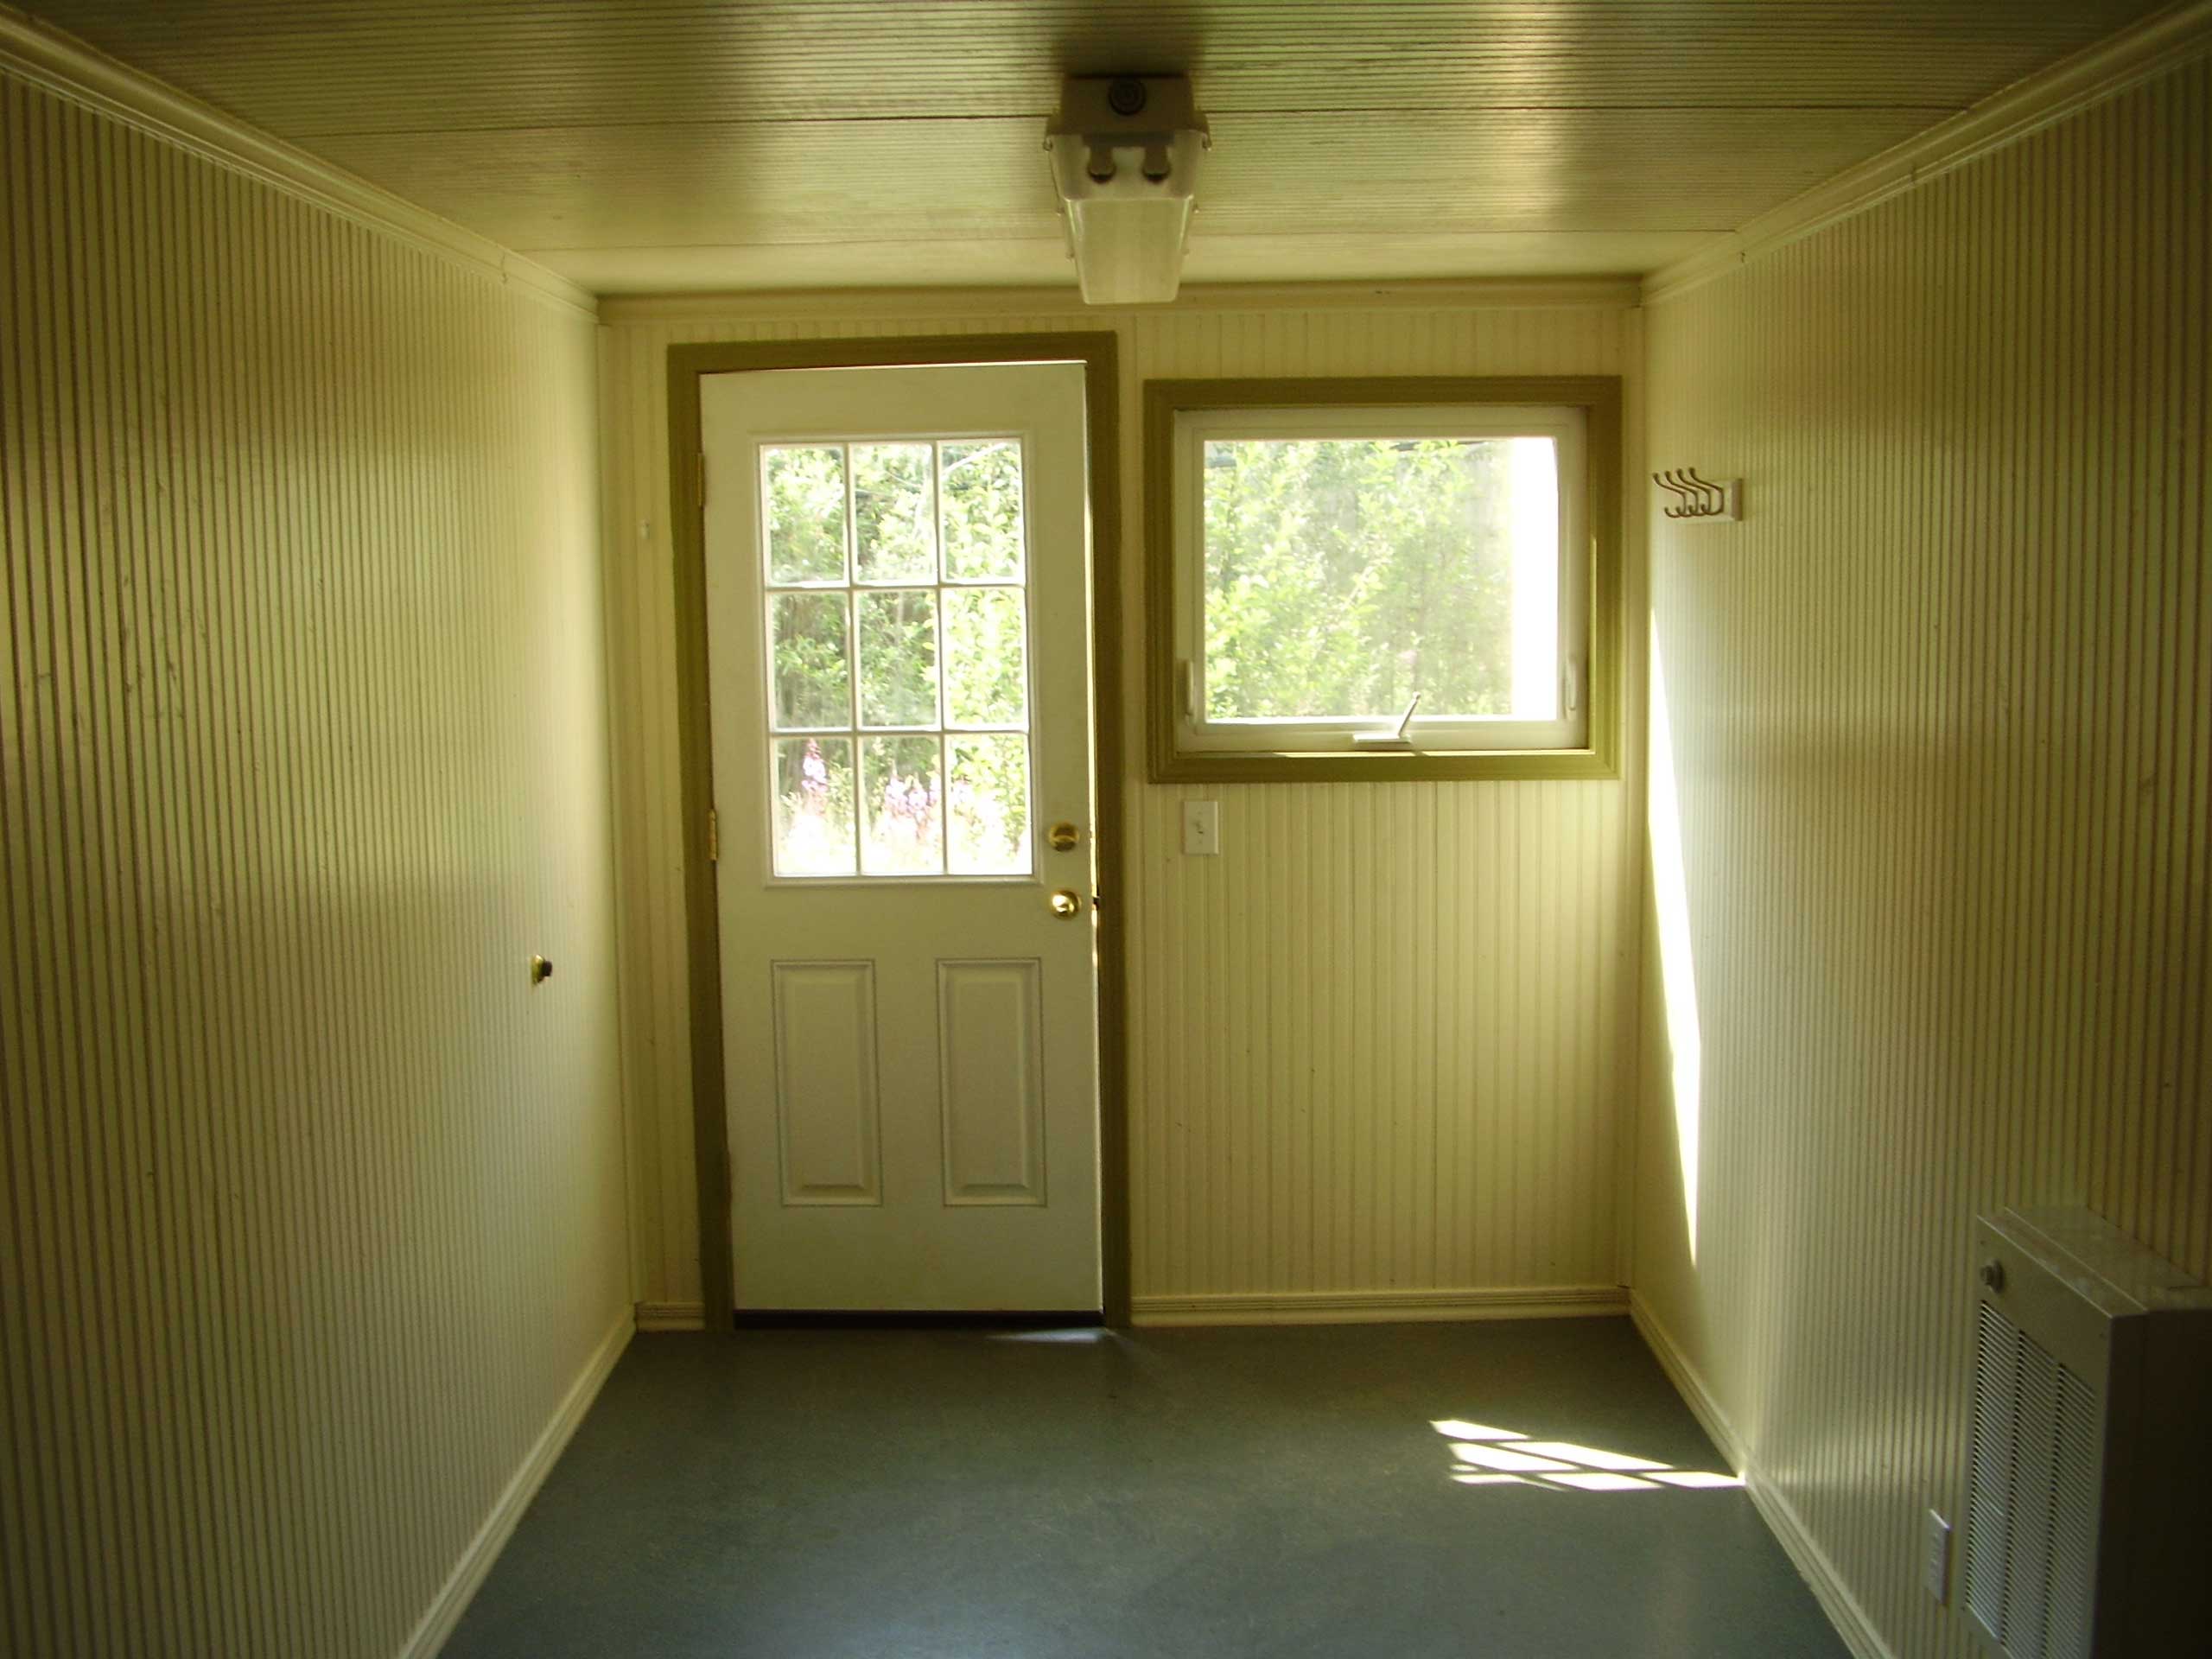 Office entry door, window-panes for natural lighting, painted interior wood-panelling with commercial carpet, wall heating system, and fluorescent lighting fixtures for a comfortable working environment for employees as either a temporary on-site office space, or off-site field office.